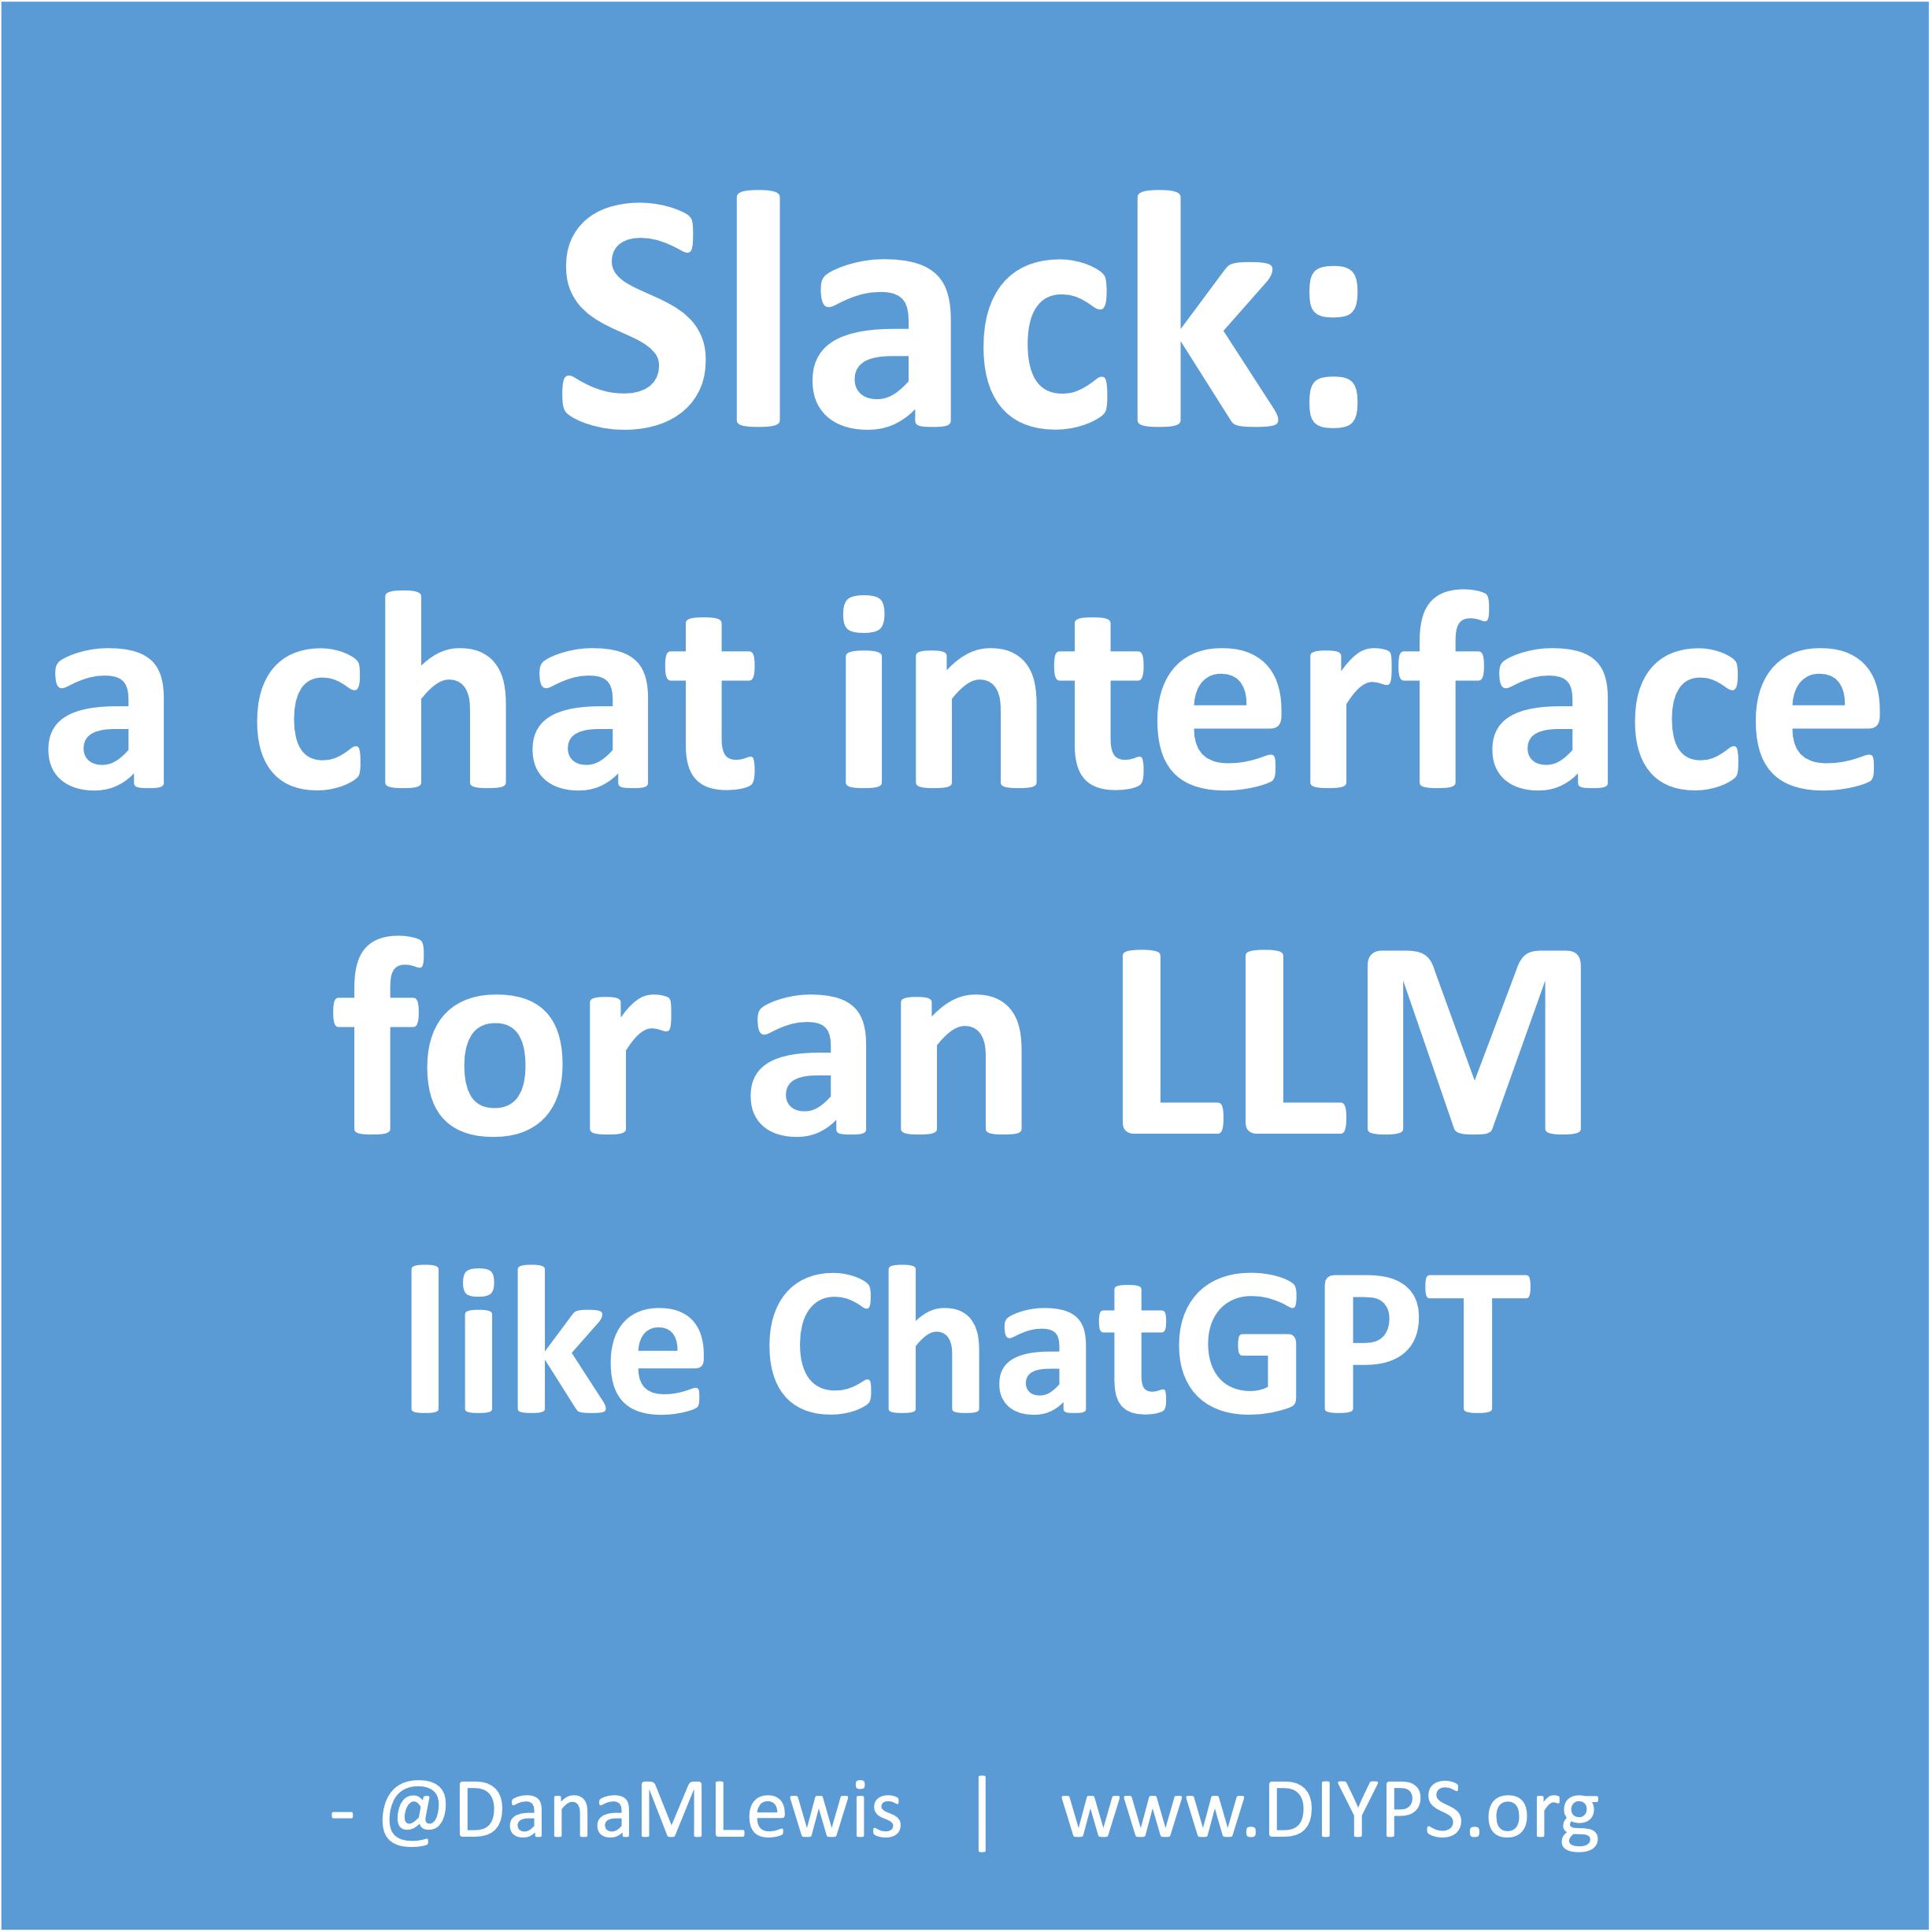 We are using Slack as a chat interface for LLMs like GPT, making the user experience similar to ChatGPT